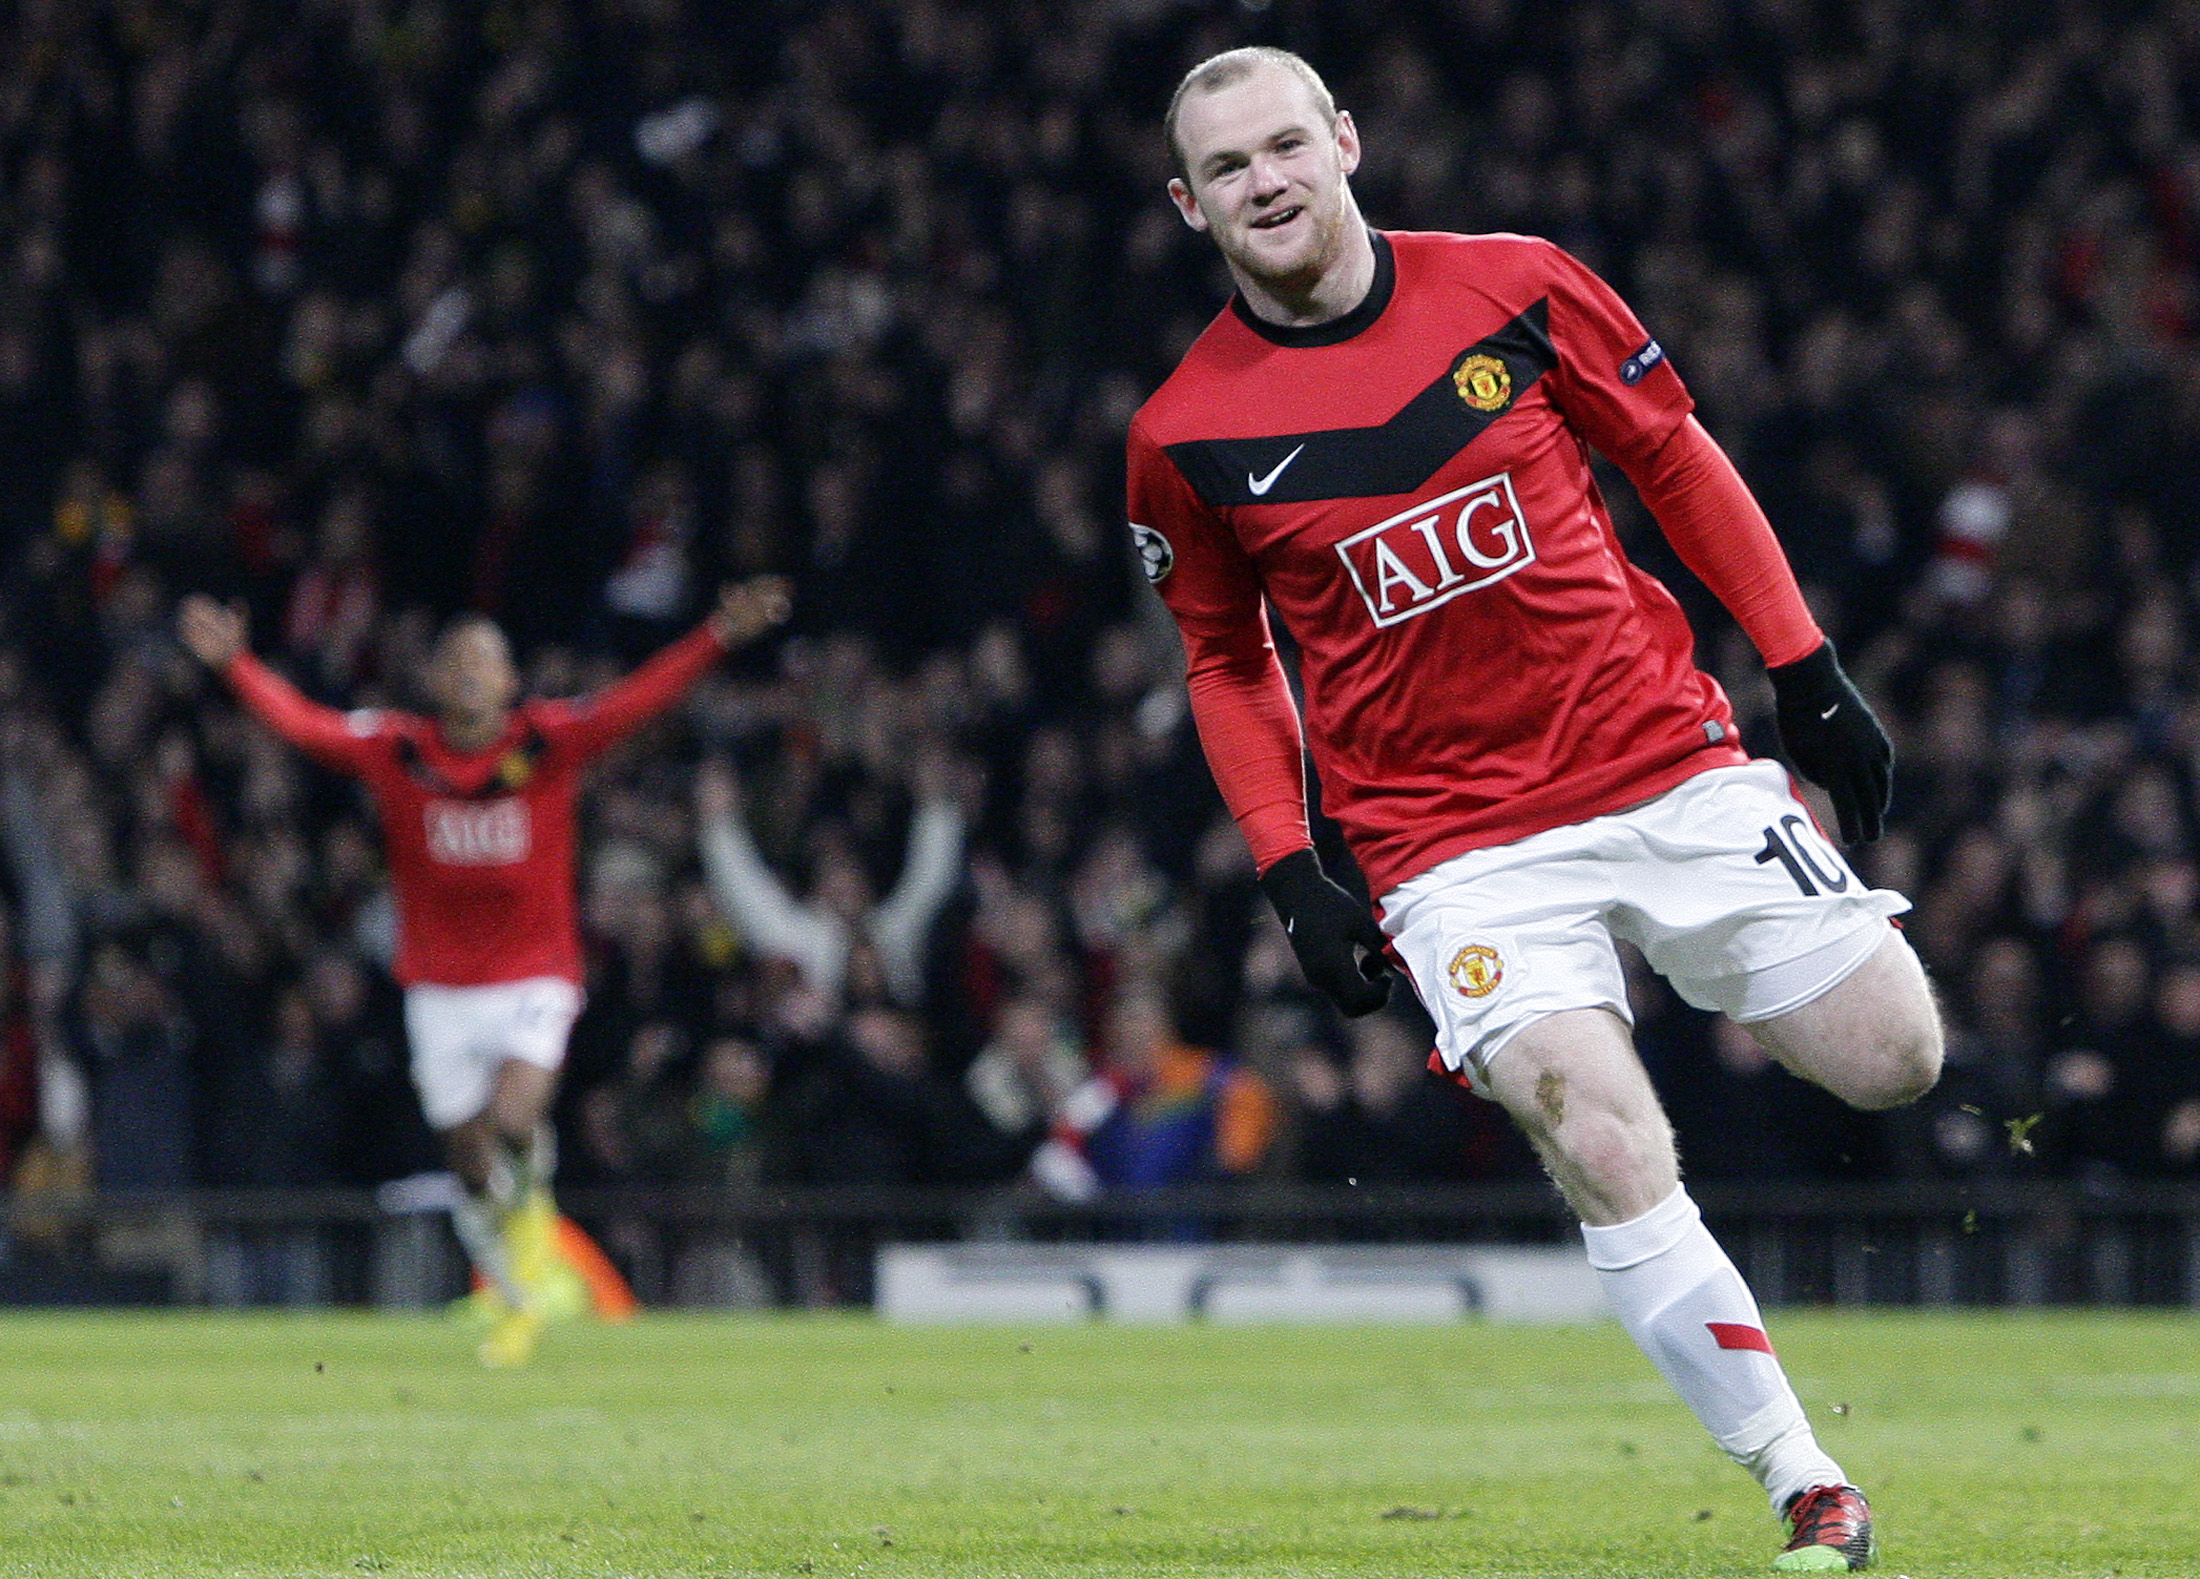 Lionel Messi, Barcelona, Champions League, Wayne Rooney, Manchester United